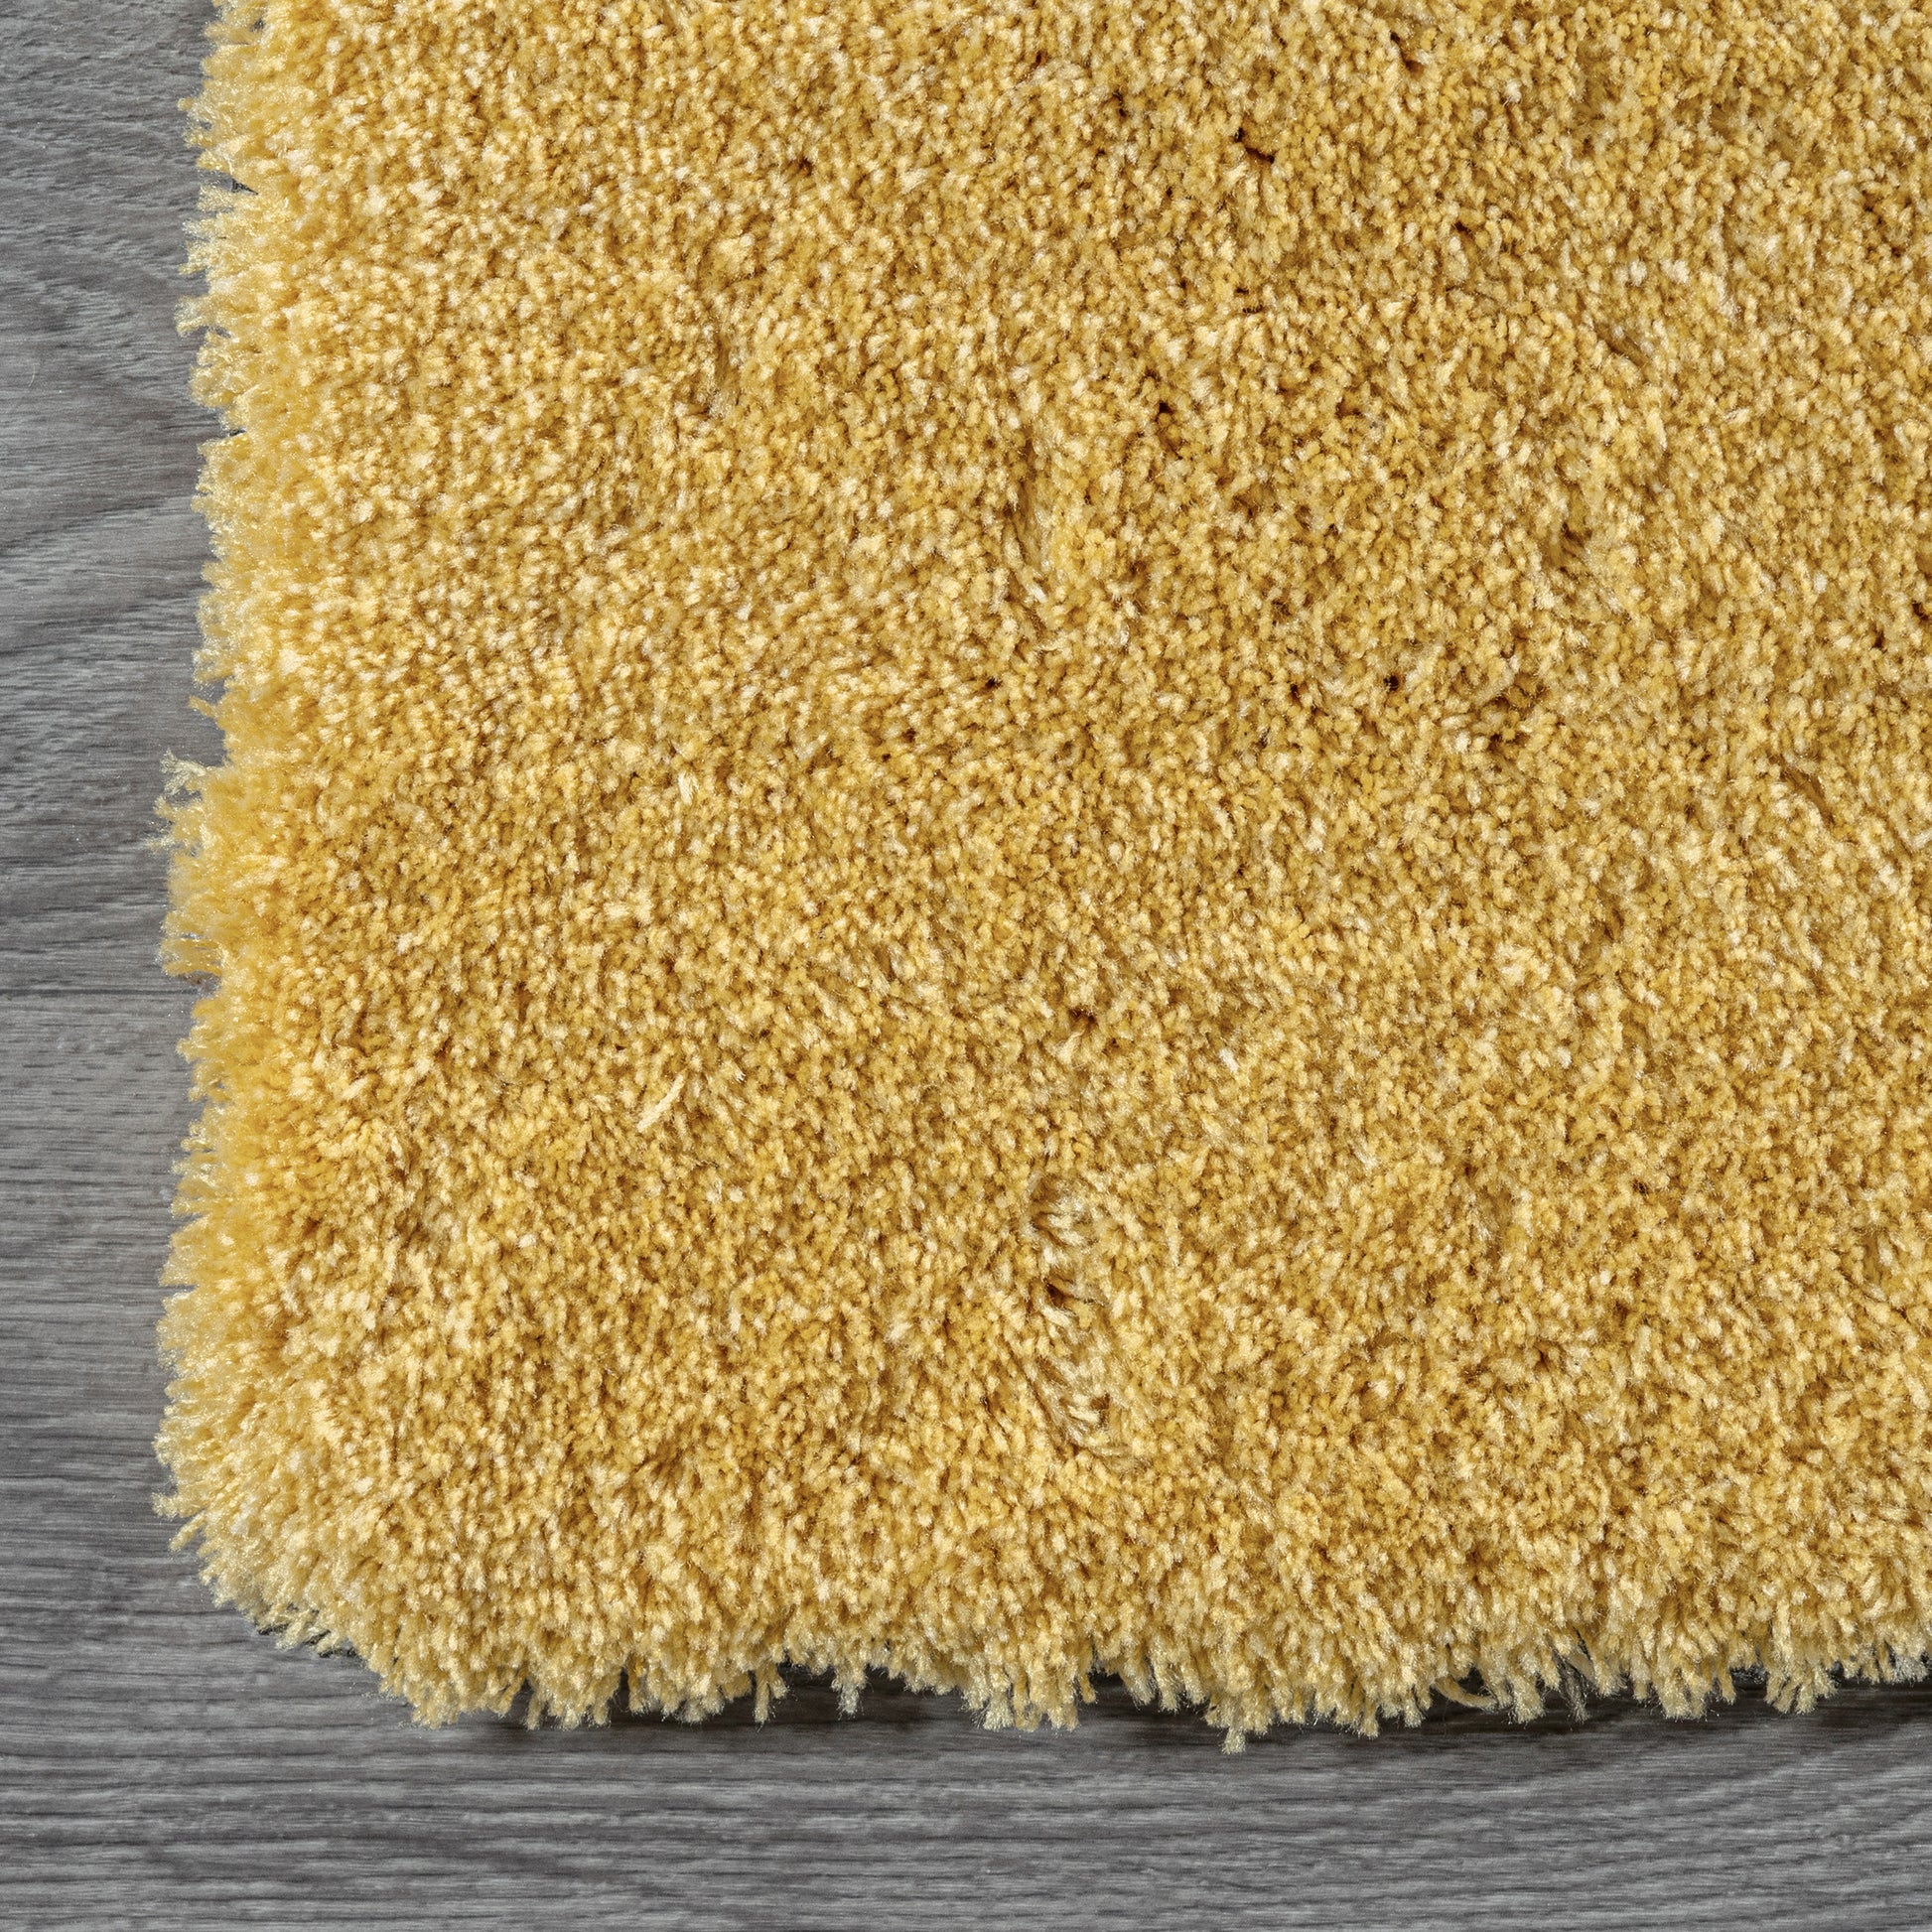 Nuloom Ombre Hjos01A Yellow Area Rug